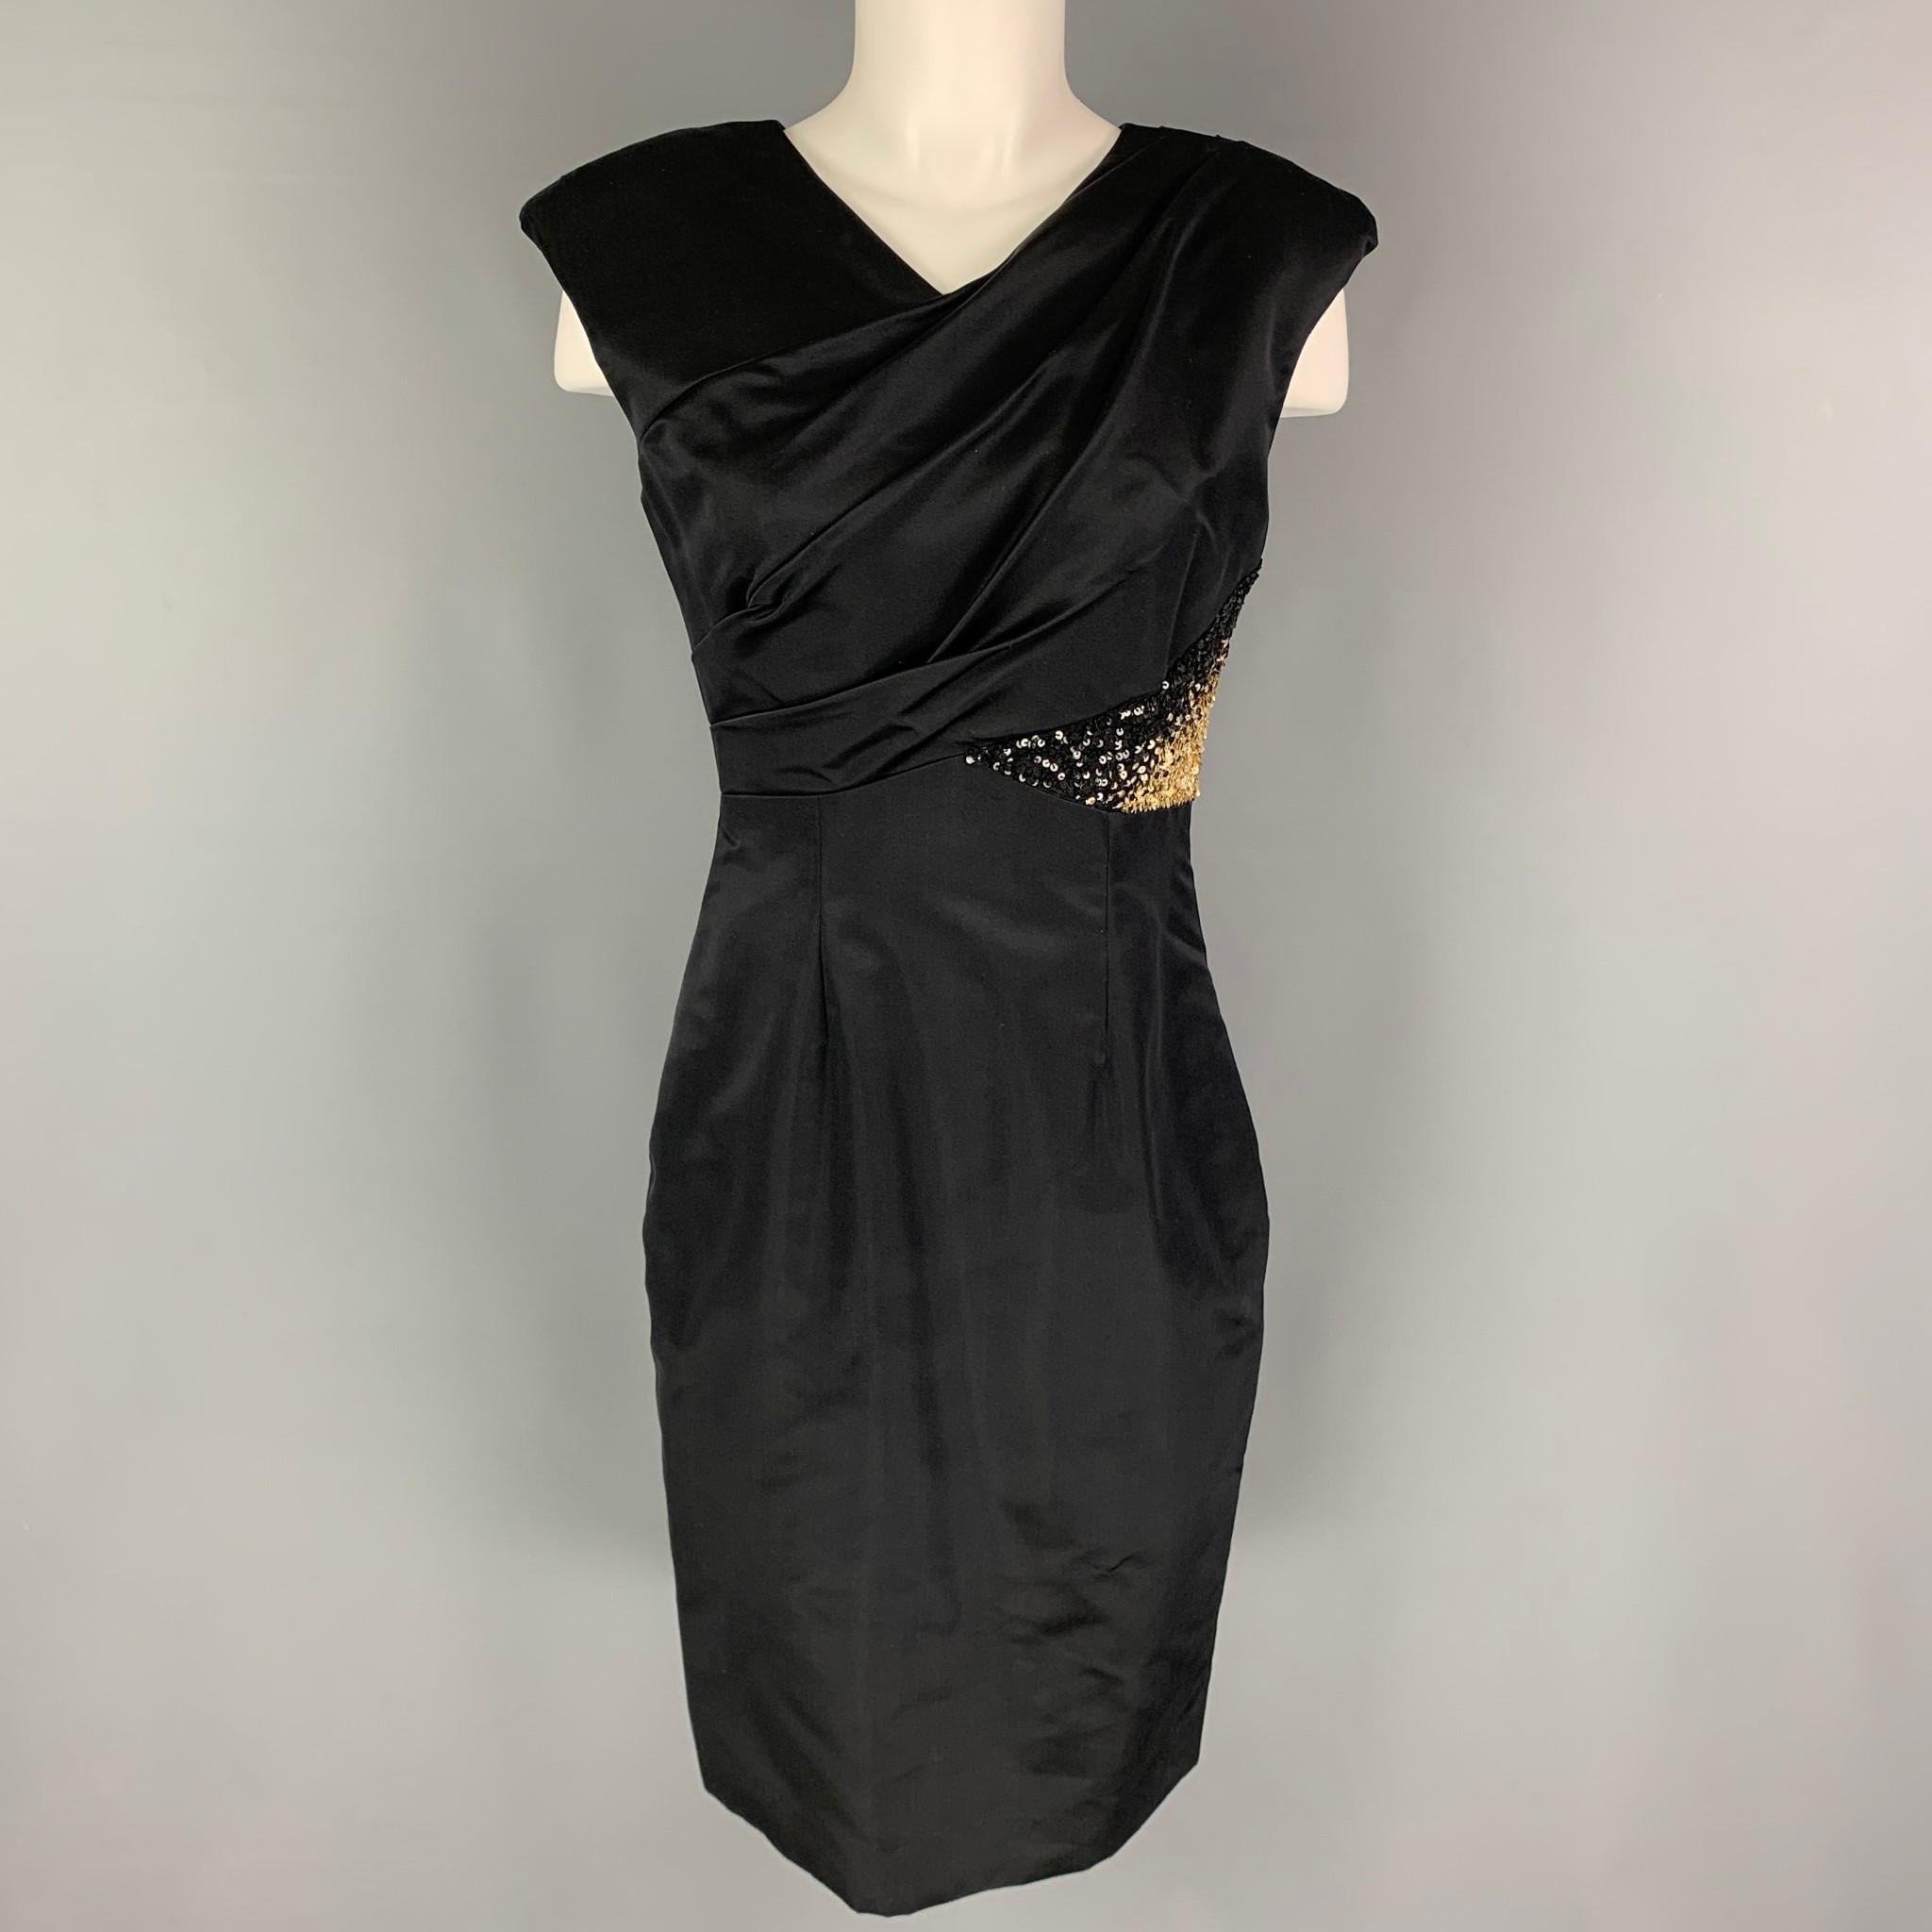 MONIQUE LHUILLIER dress comes in a black rayon featuring a ruched bodice, gold sequined trim, padded shoulders, and a side zipper closure. Made in USA. 

Very Good Pre-Owned Condition.
Marked: 4

Measurements:

Shoulder: 18 in.
Bust: 34 in.
Waist: